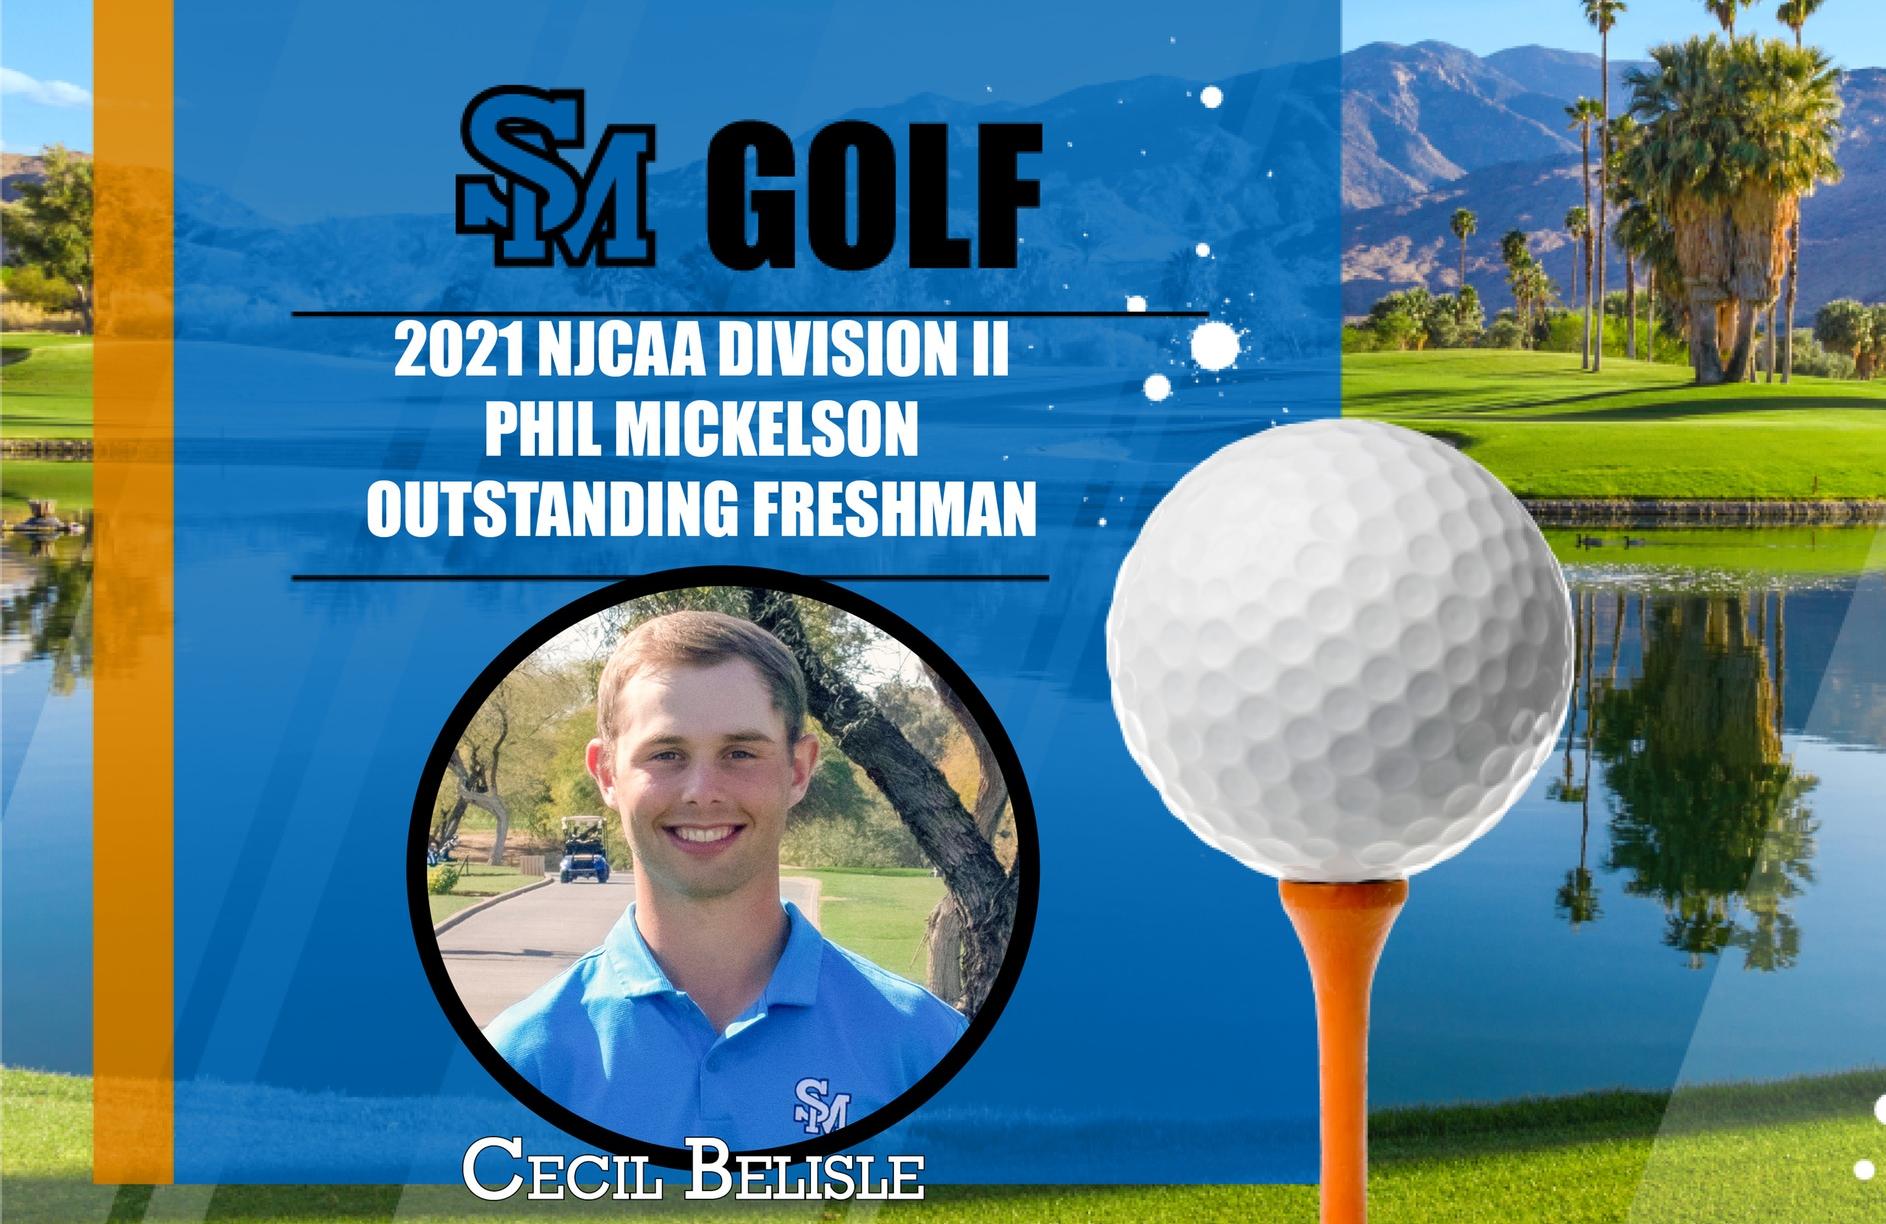 Cecil Belisle Named 2021 NJCAA Division II Phil Mickelson Outstanding Freshman